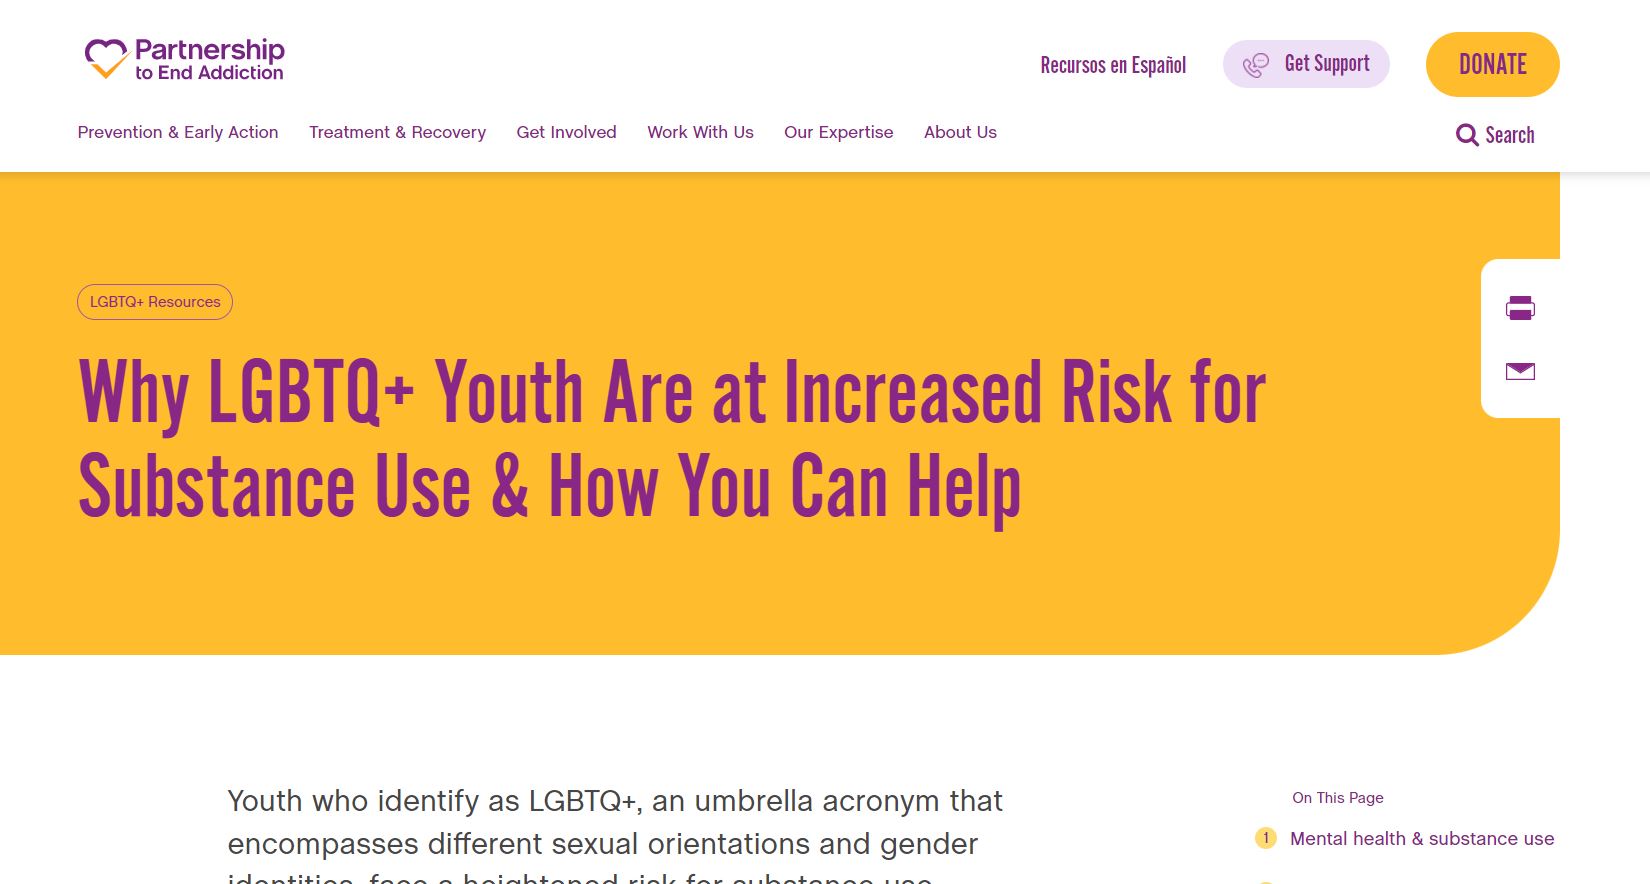 Partnership to End Addiction: Why LGBTQ+ Youth Are at Increased Risk for Substance Use & How You Can Help